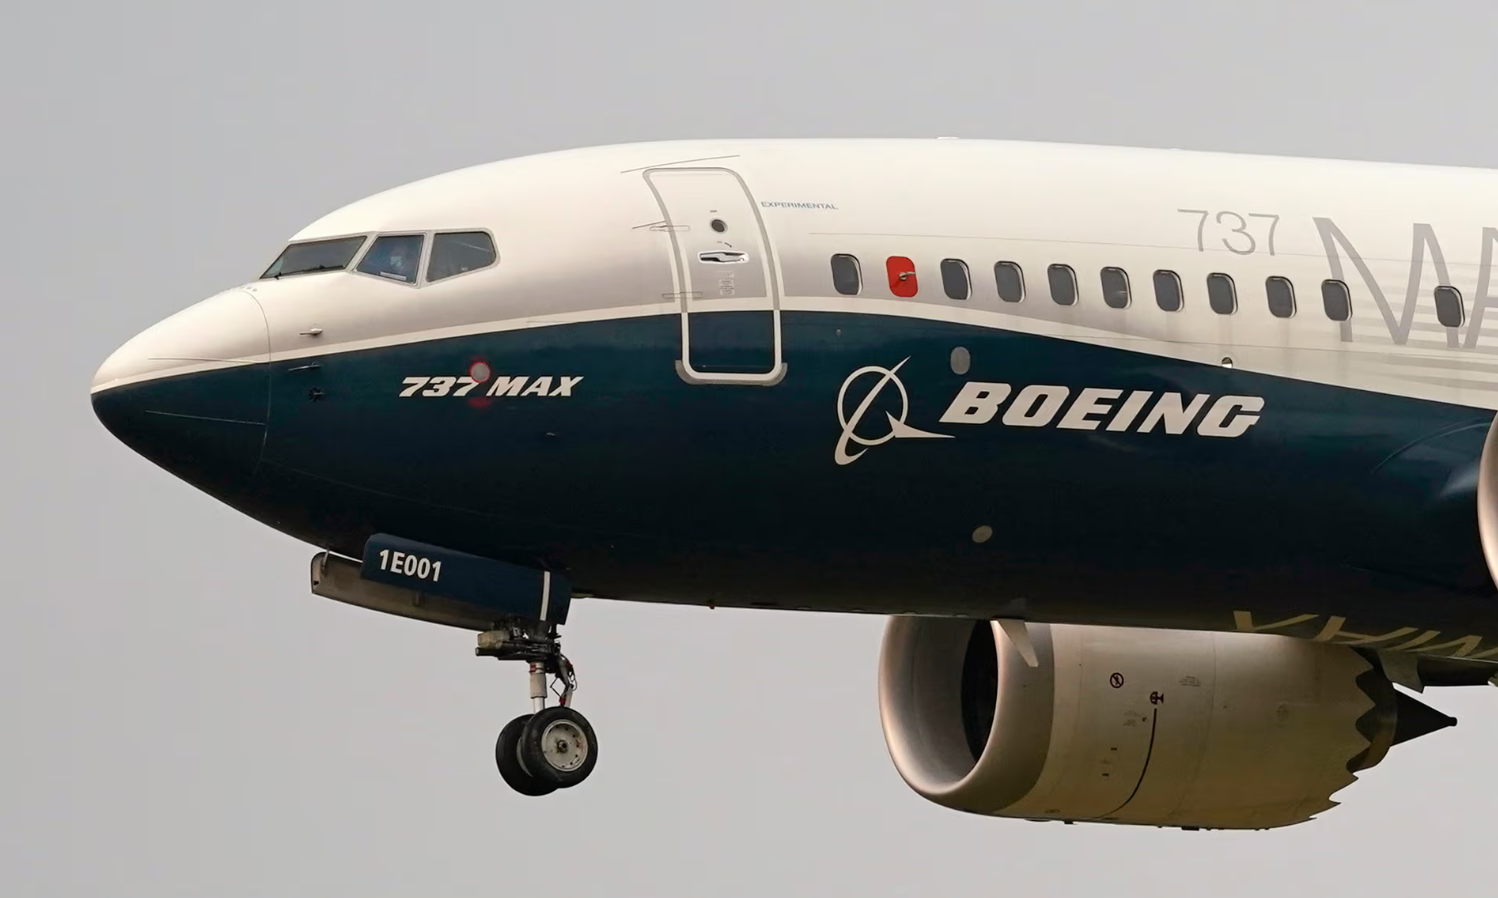 Boeing will plead guilty to criminal fraud over 737 Max crashes, justice department says